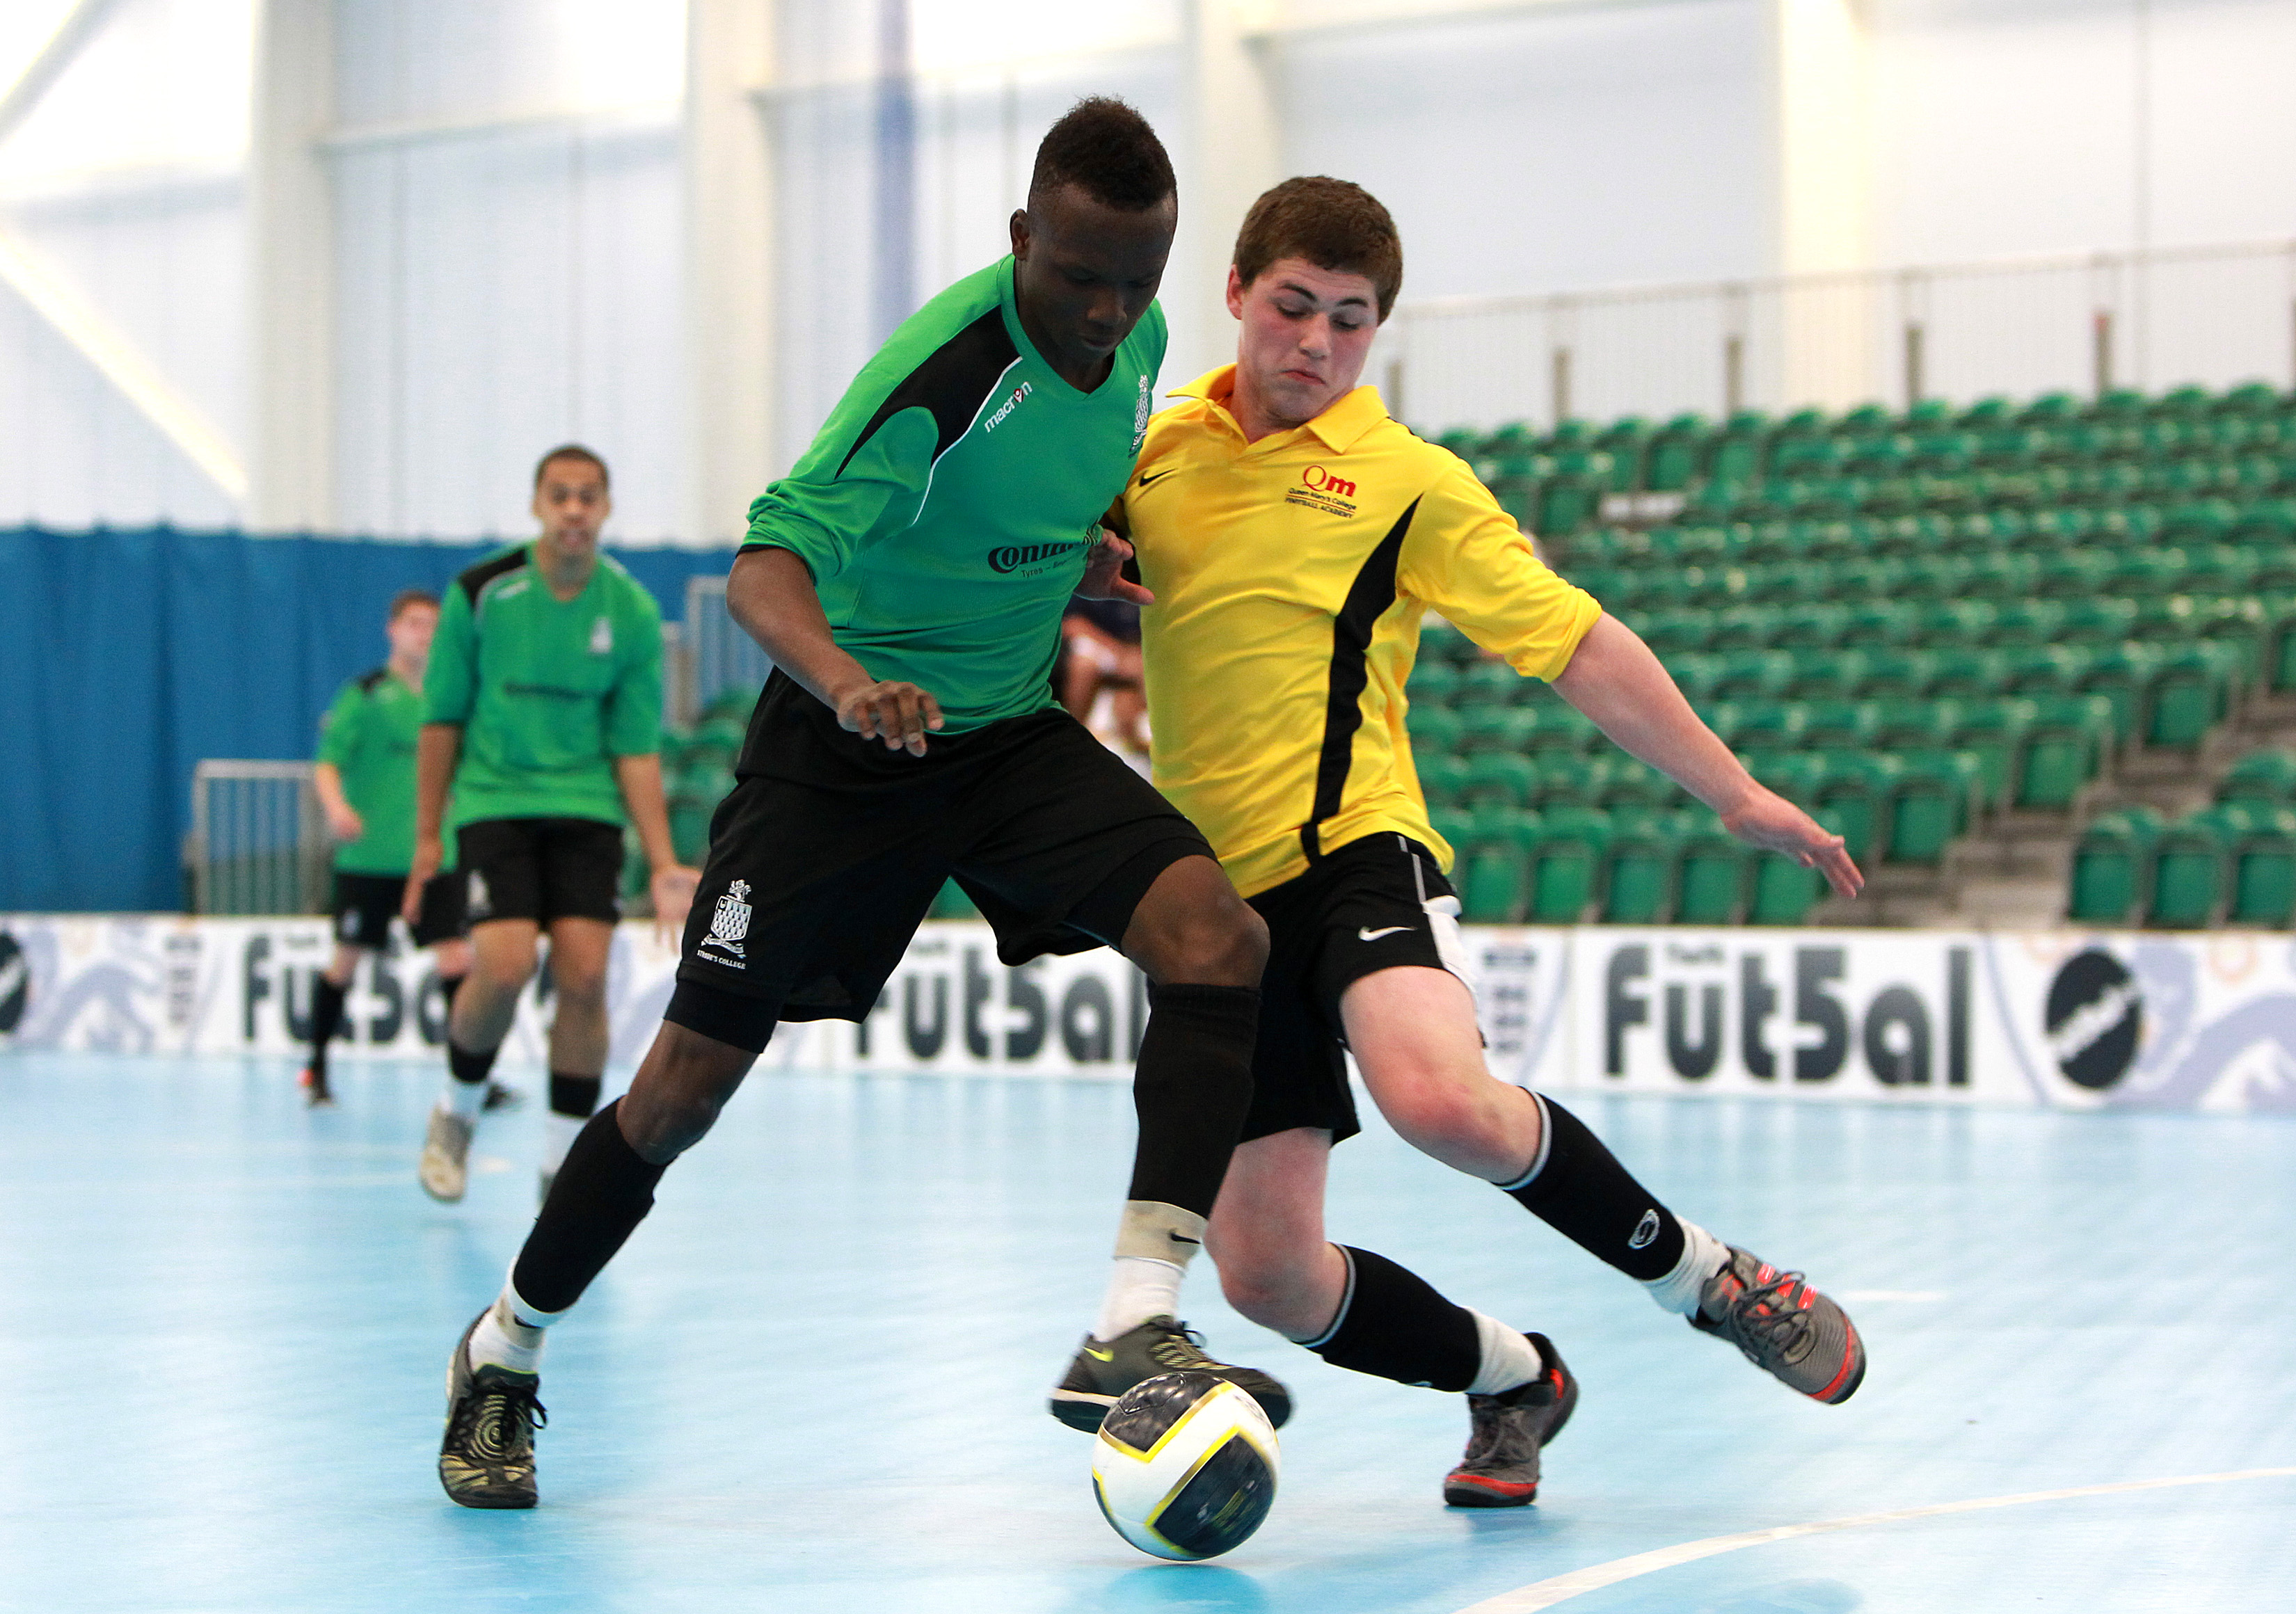 Five a side and Futsal - Get Involved - The Football Association